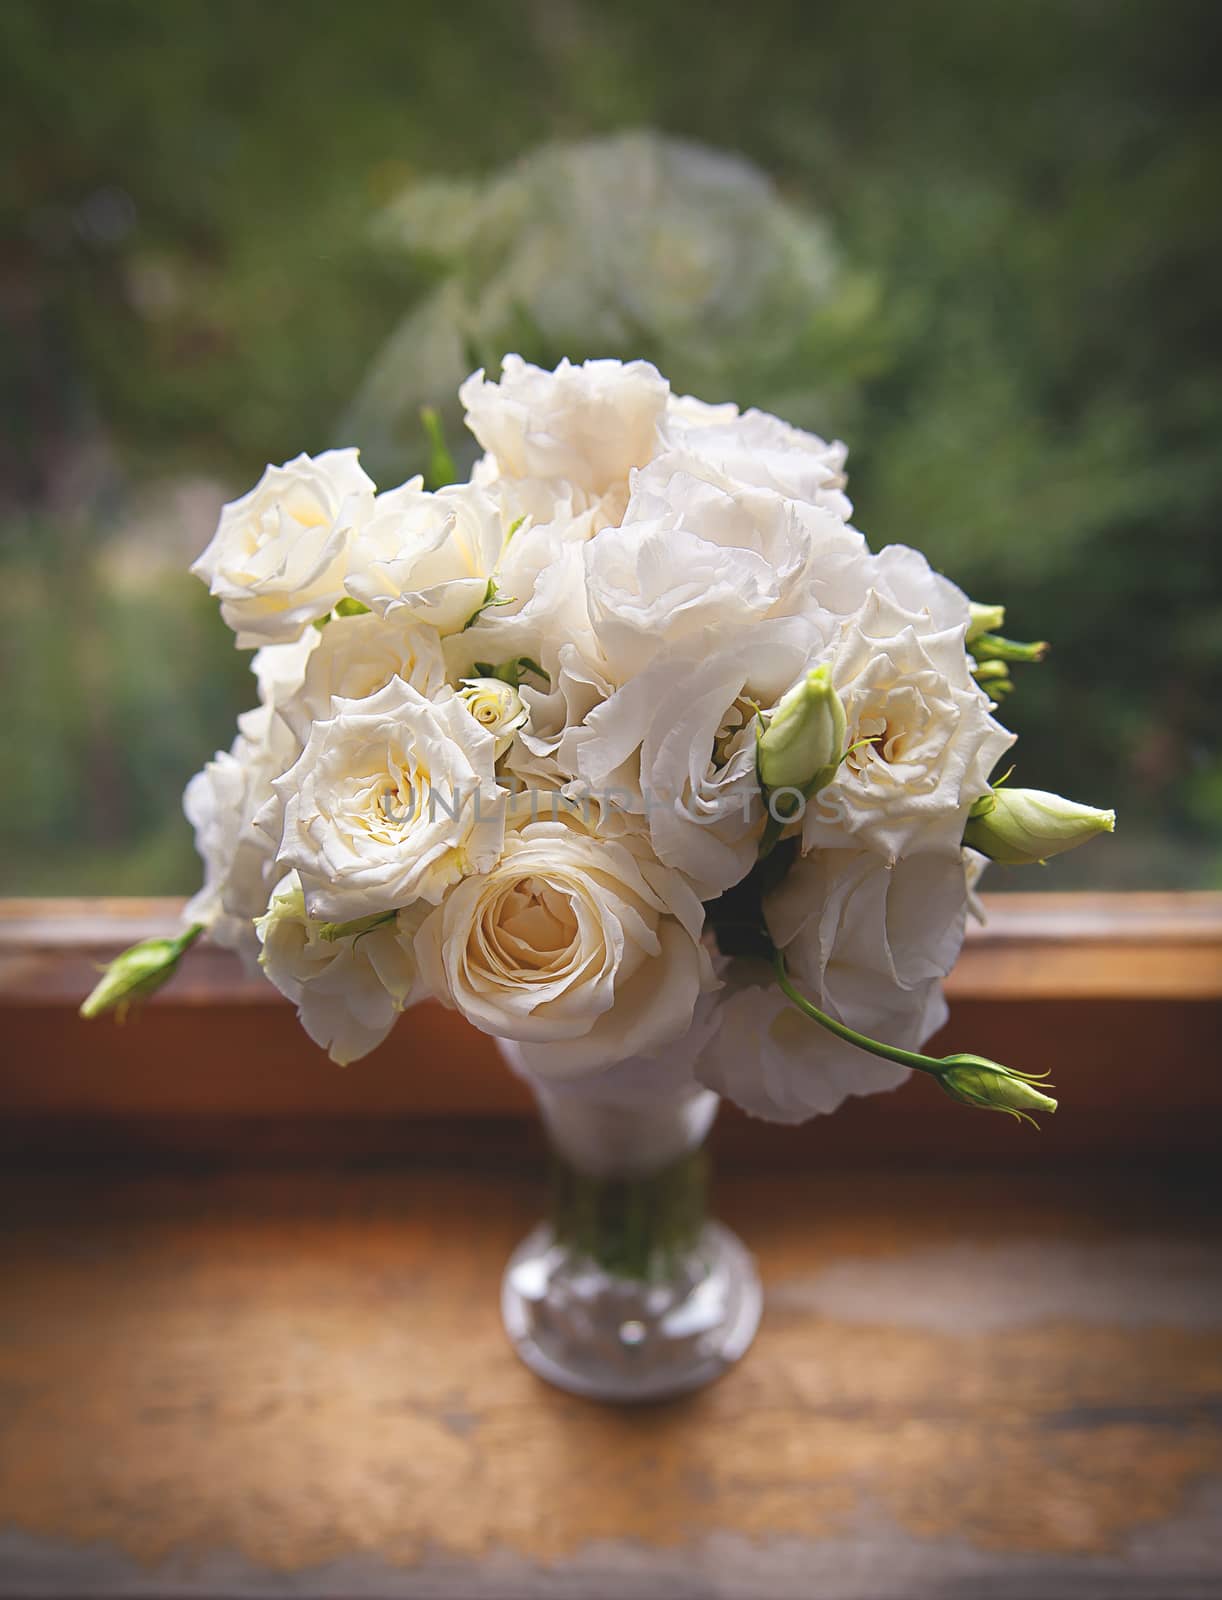 Beautiful white Roses in a glass vase near window